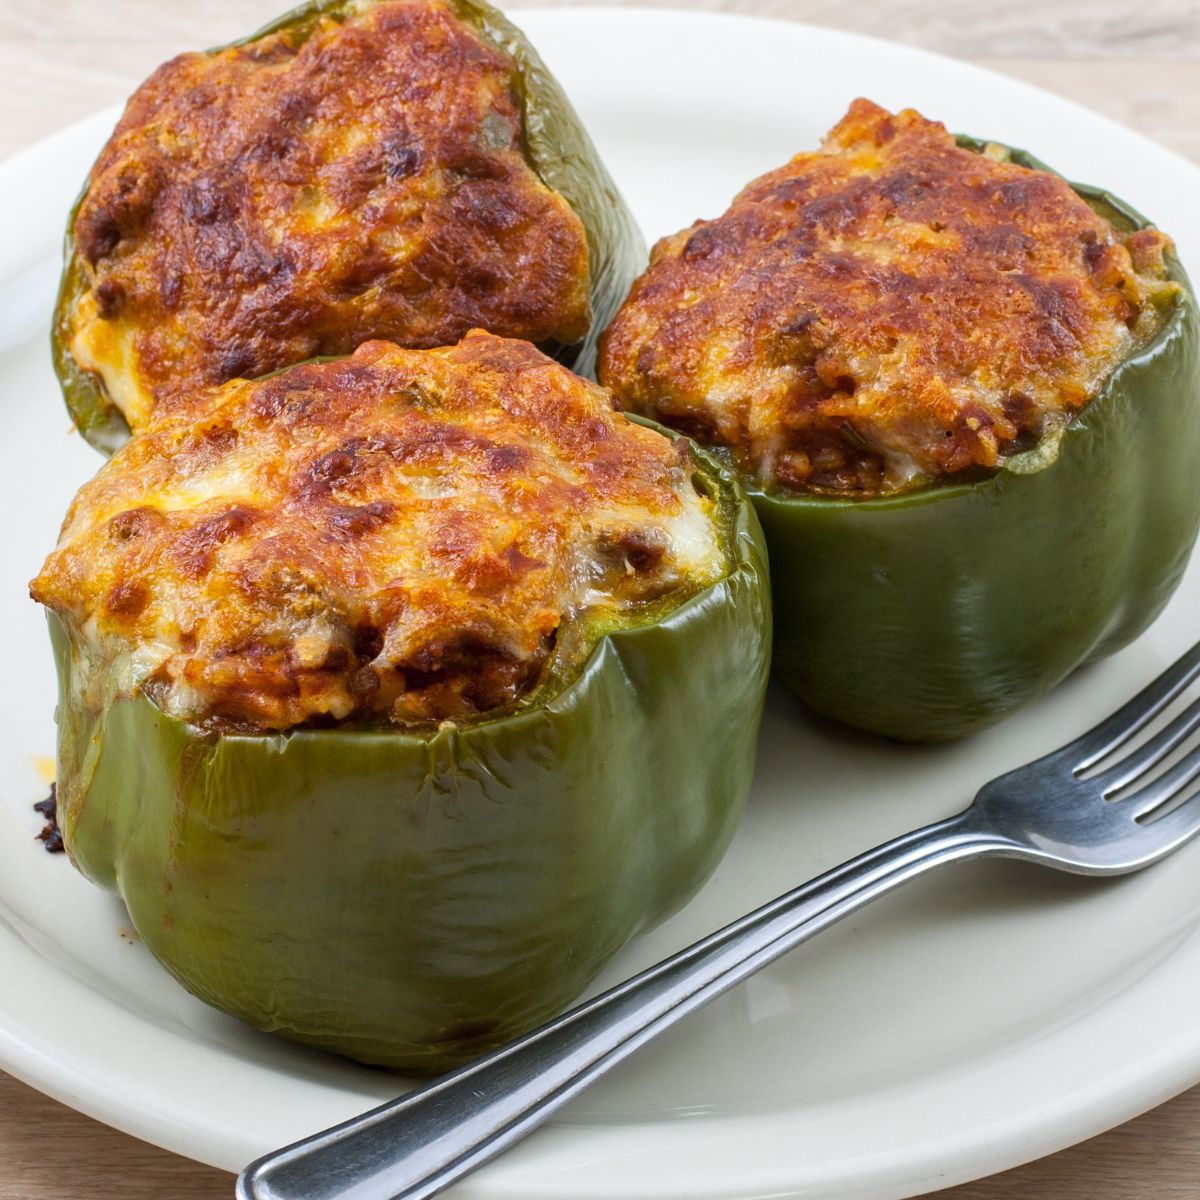 Turkey and Spinach Stuffed Peppers